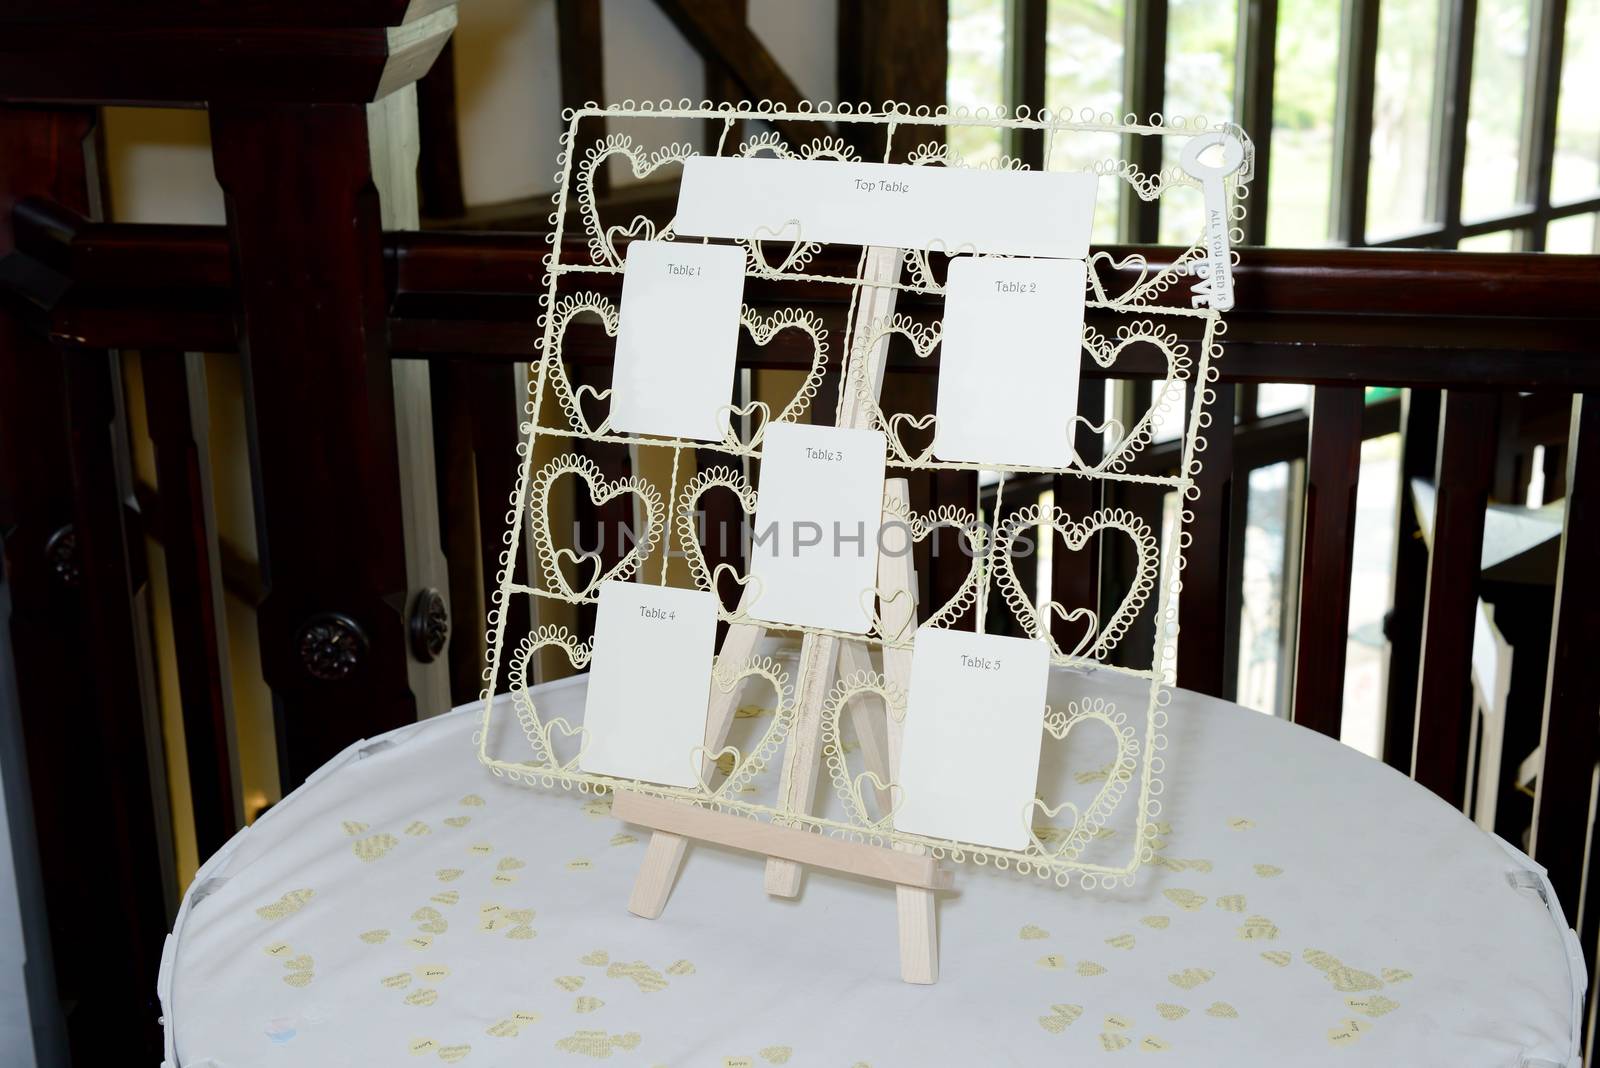 Wedding seating plan by kmwphotography